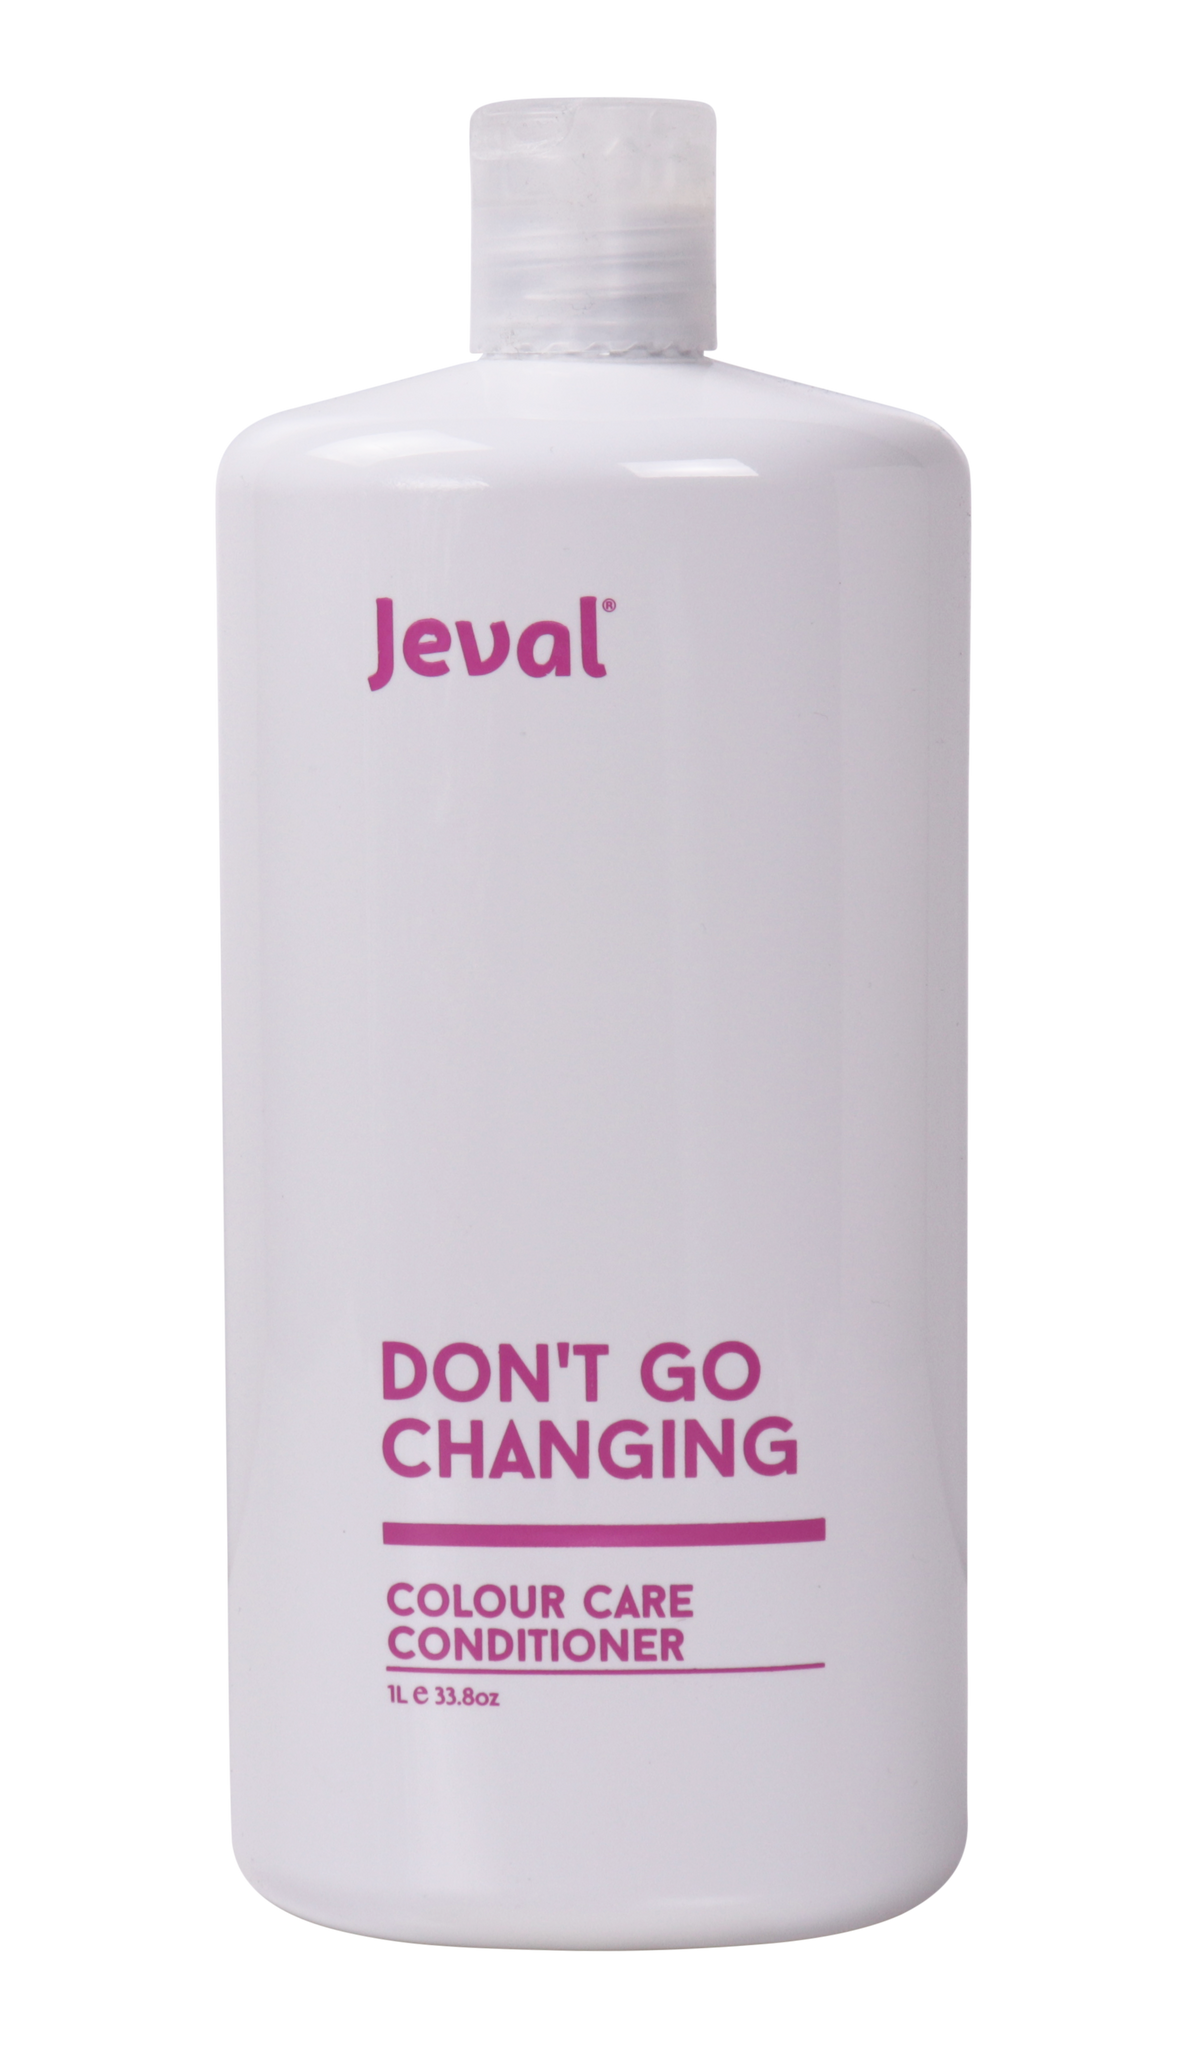 Jeval Don’t Go Changing Colour Care Conditioner 1 Litre - Beautopia Hair & Beauty